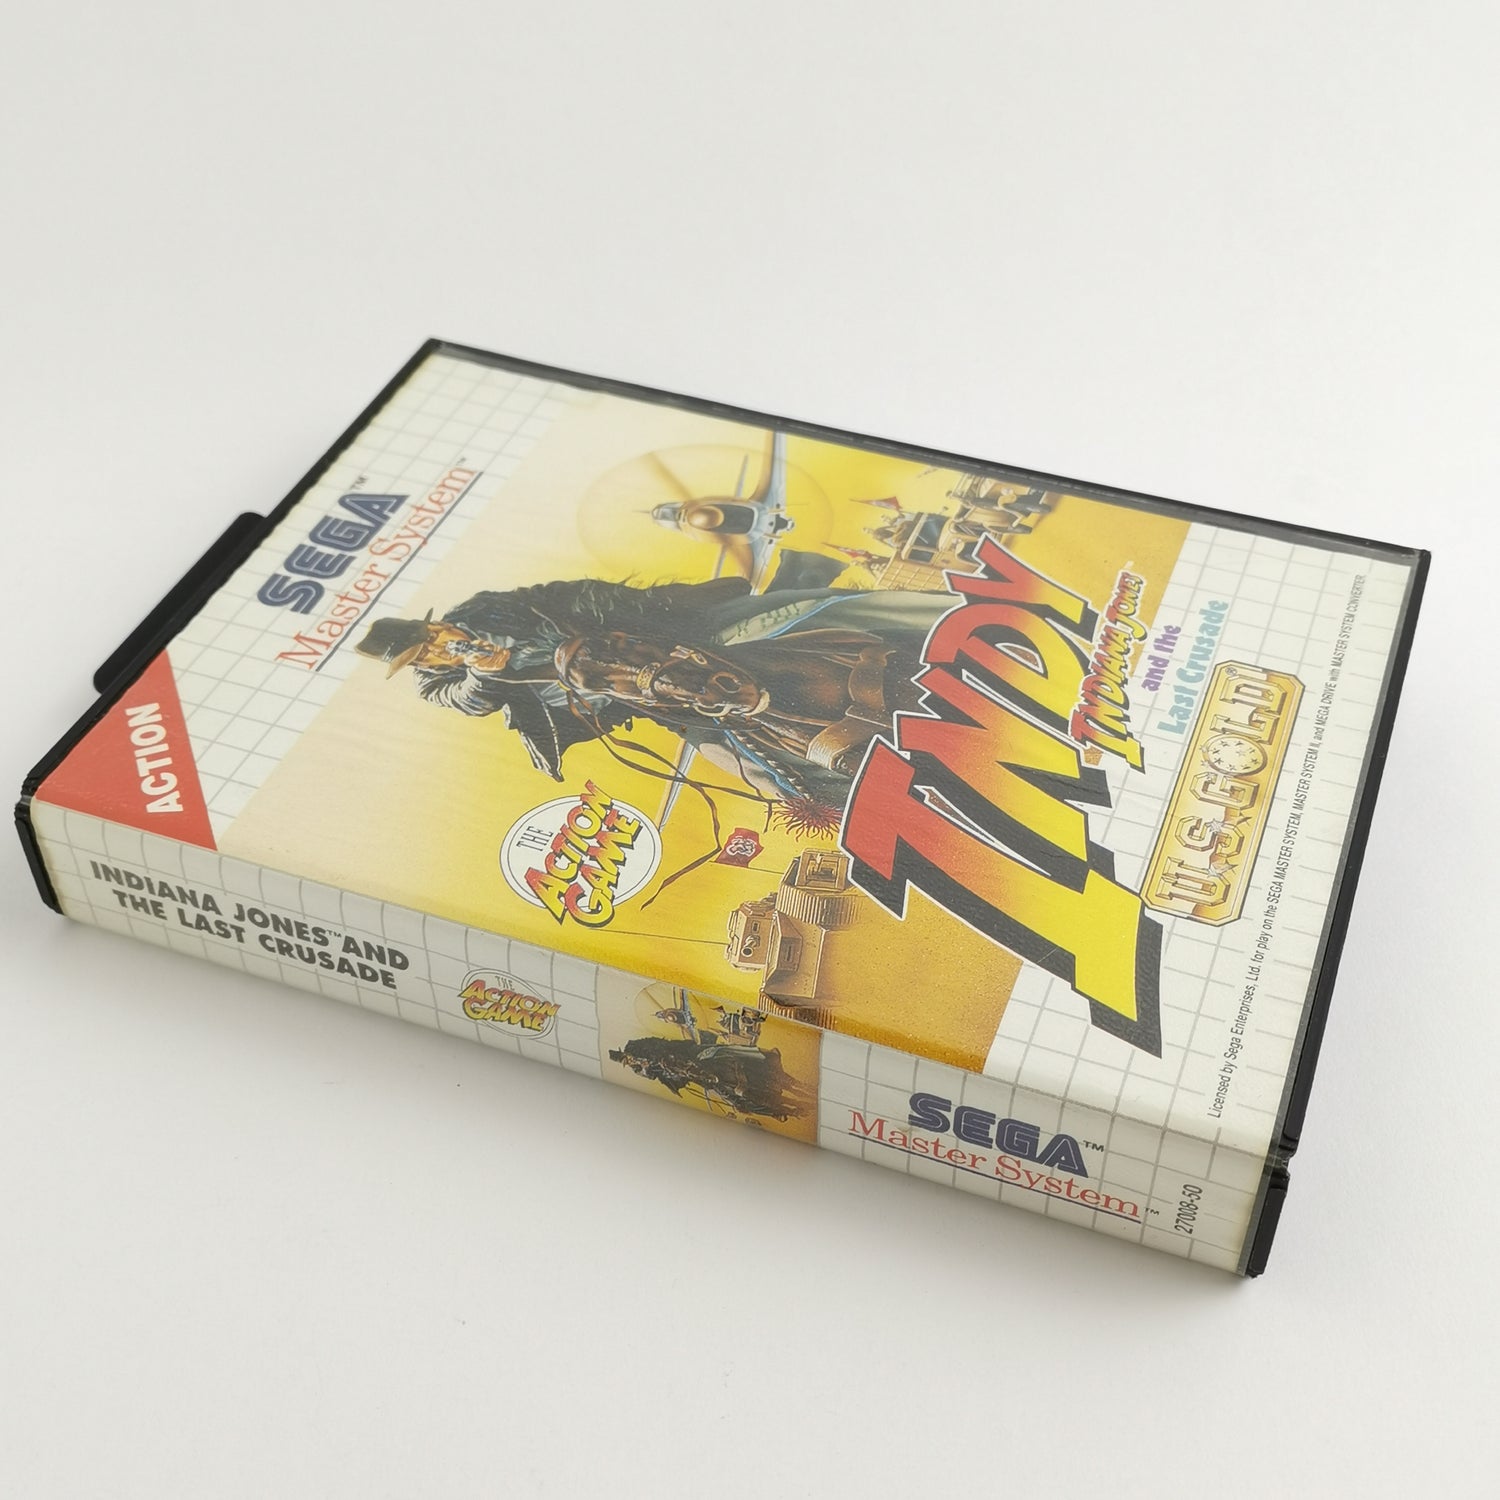 Sega Master System Game: Indy Indiana Jones and the Last Crusade - OVP MS PAL